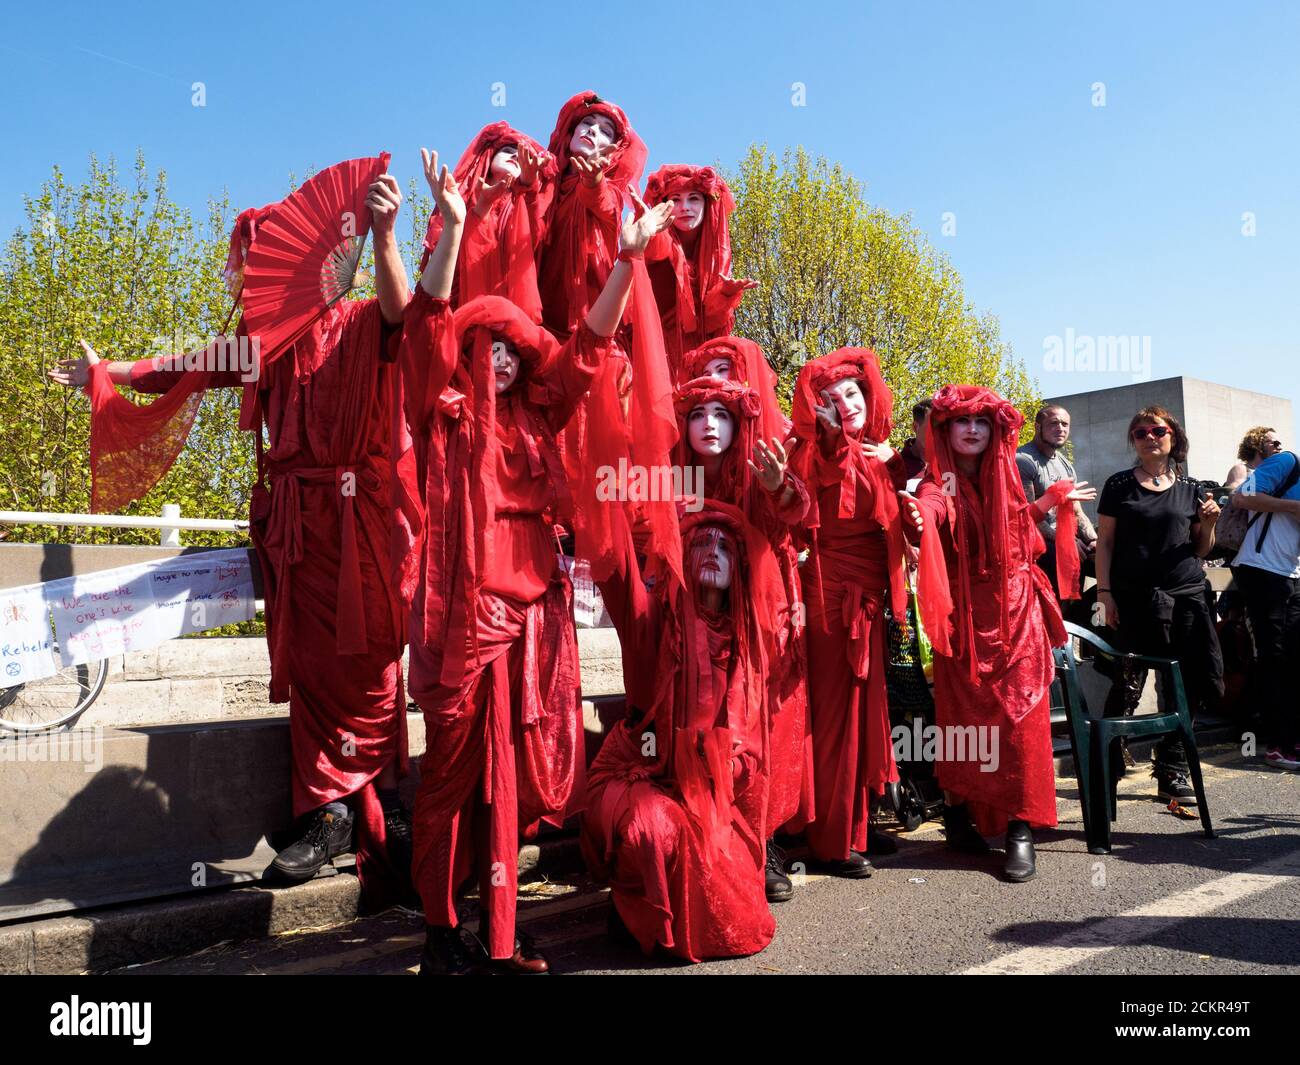 London, UK. 20th April 2019. Waterloo bridge has been blocked by climate change campaigners from Extinction Rebellion for six days. During that time, they have created a Garden bridge used for International Rebellion activities to demand urgent action to combat climate change by the British government Stock Photo